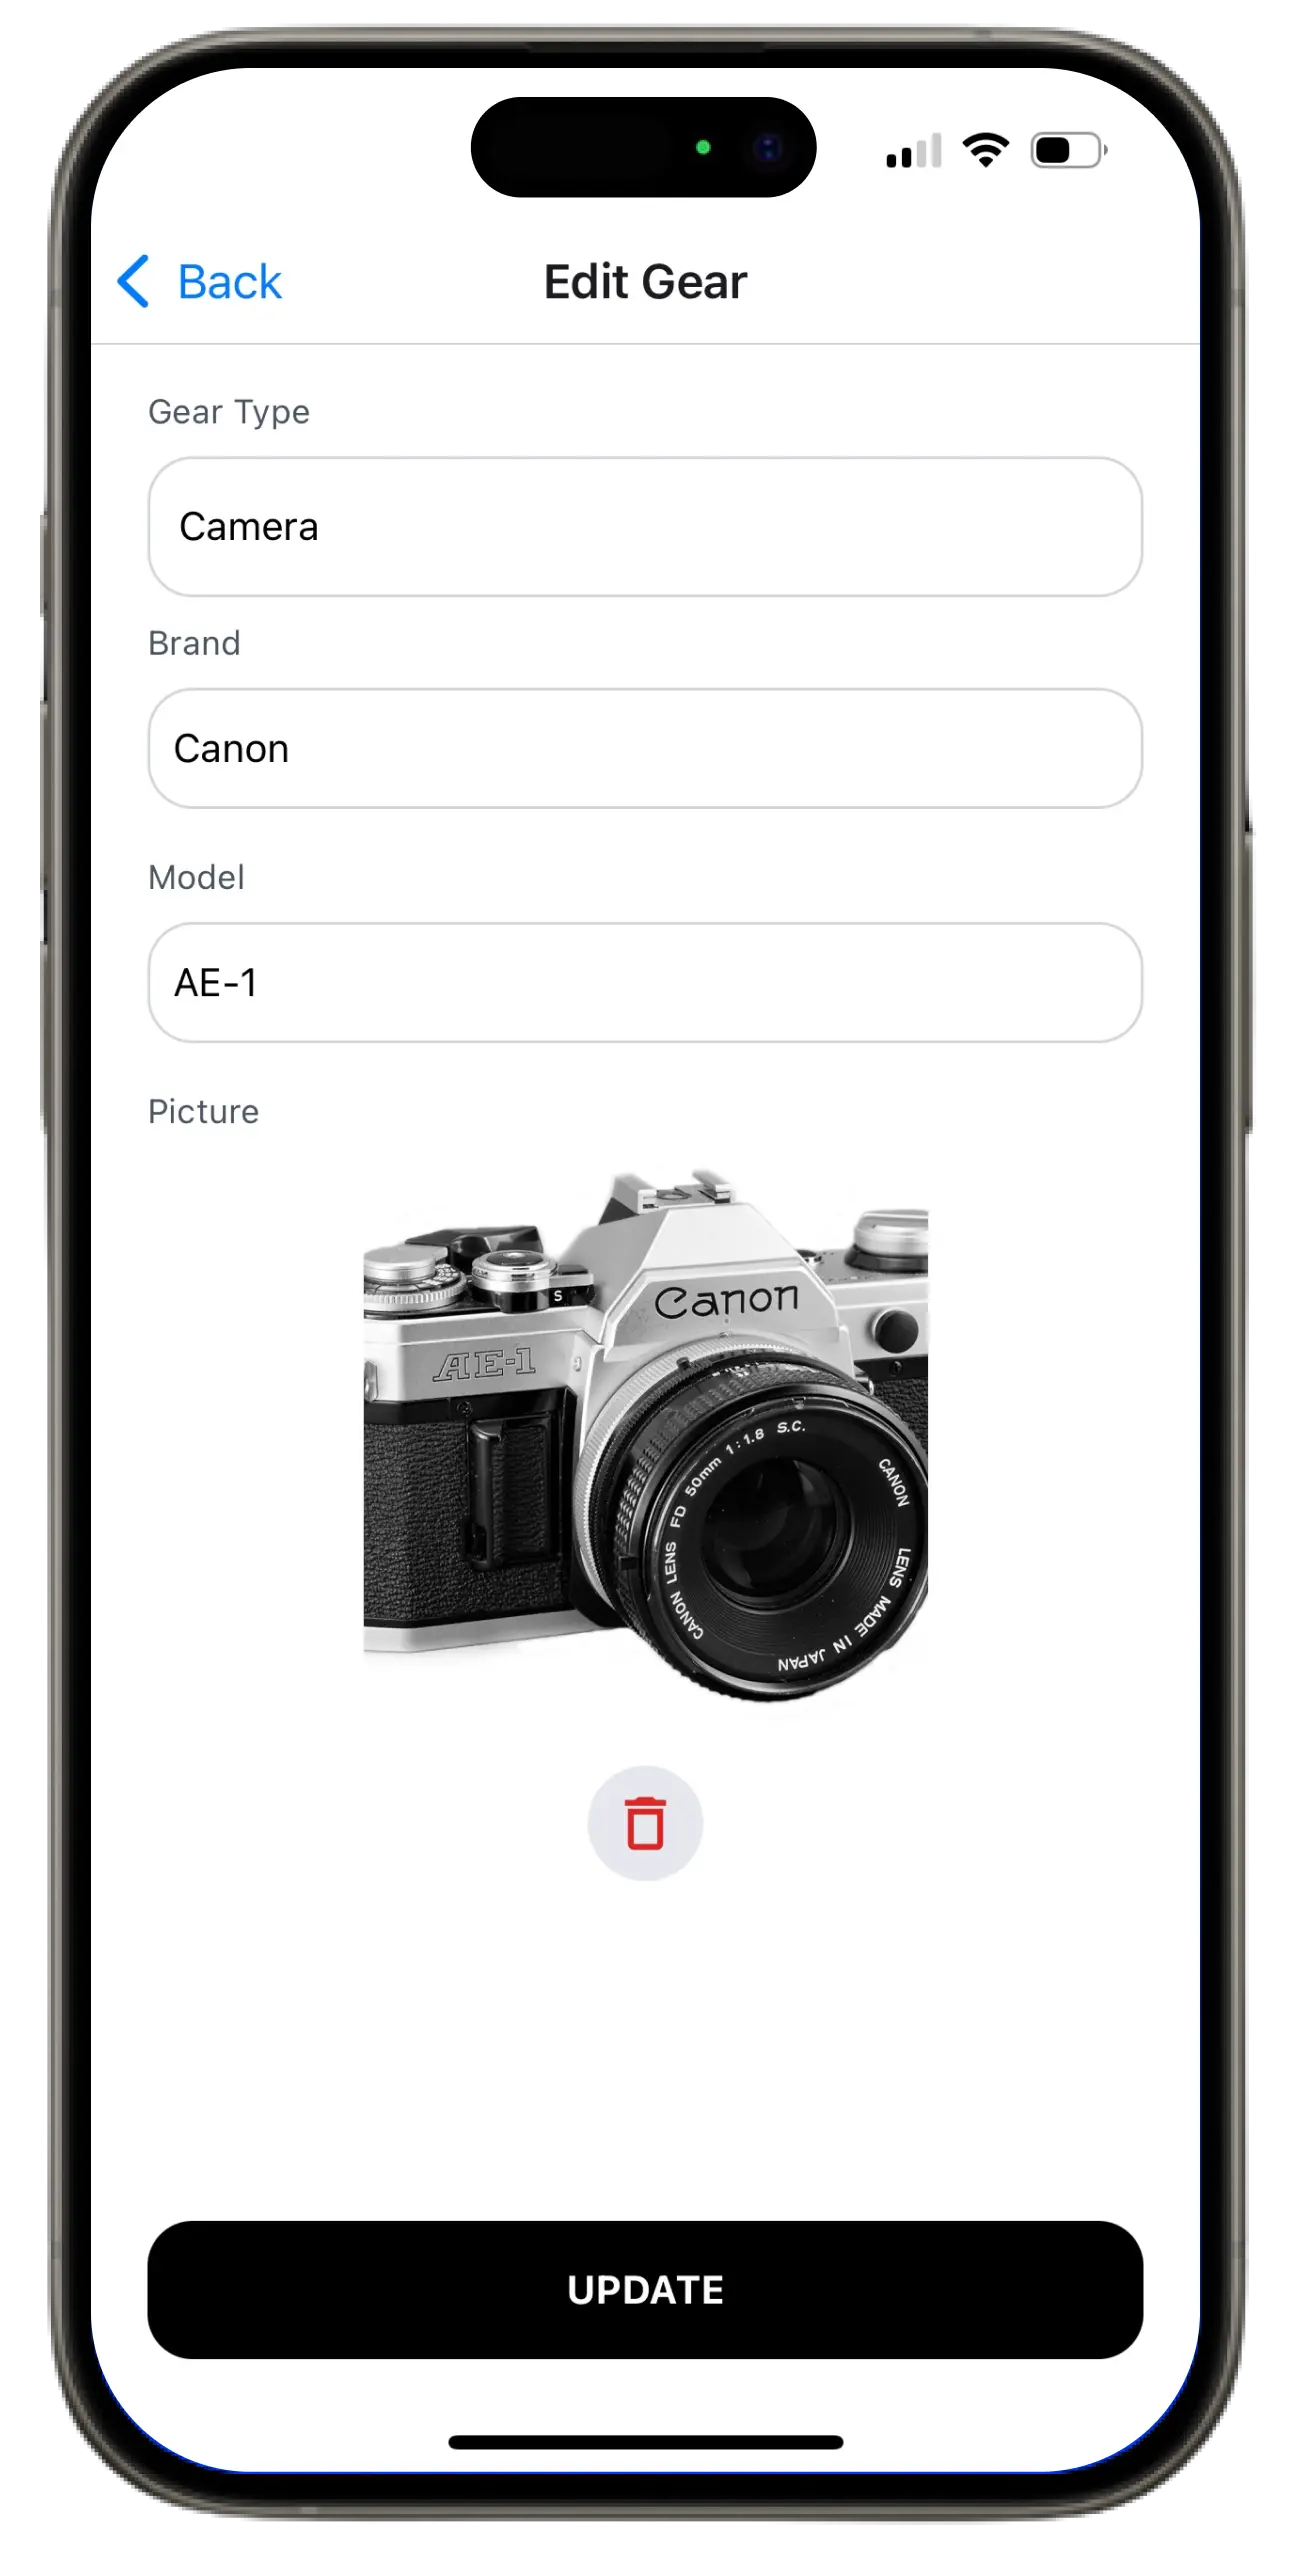 Screenshot of the gear list in the app.